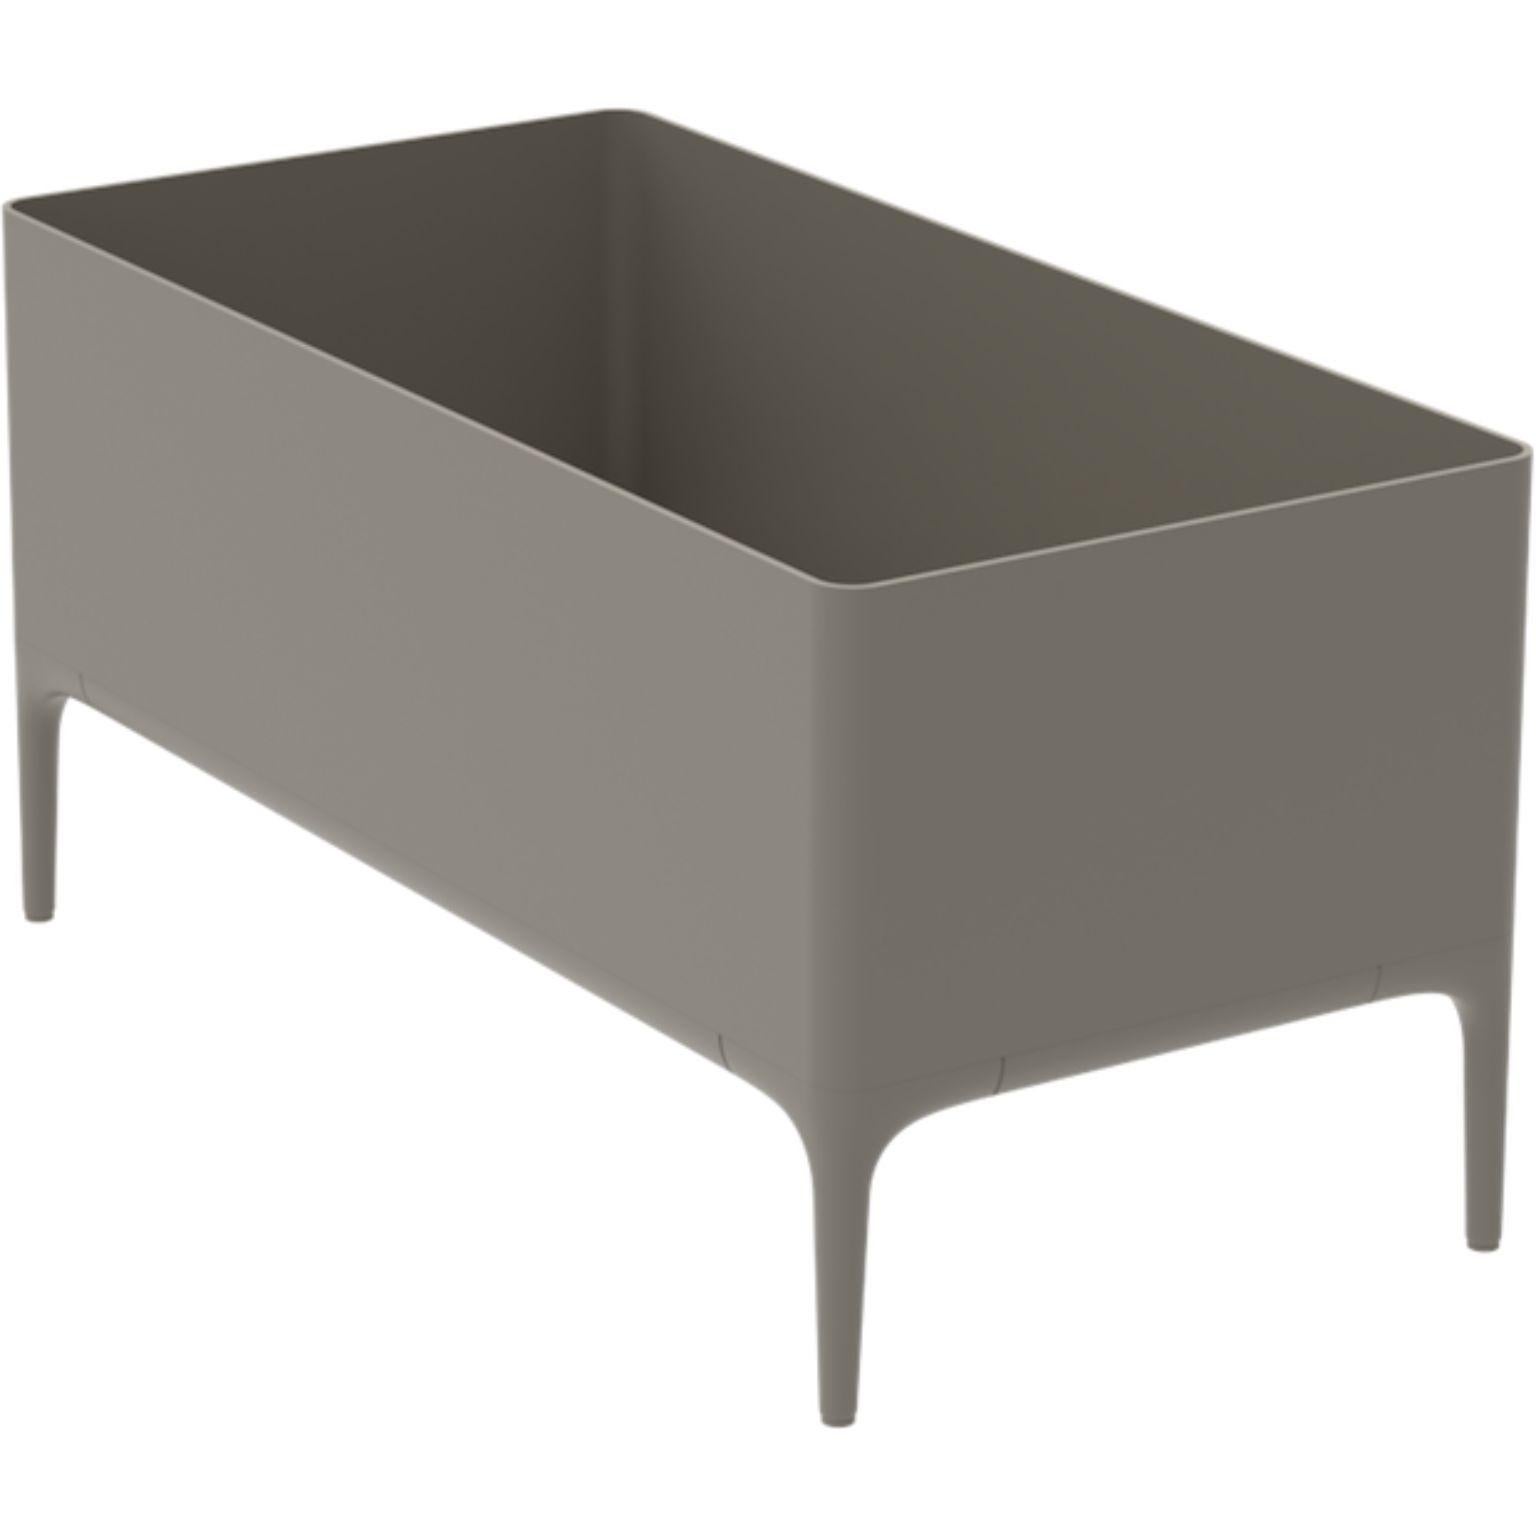 Xaloc Cream Planter by MOWEE
Dimensions: D90 x W45 x H45 cm
Material: Aluminium
Weight: 11 kg
Also Available in different colours and finishes. 

 Xaloc synthesizes the lines of interior furniture to extrapolate to the exterior, creating an